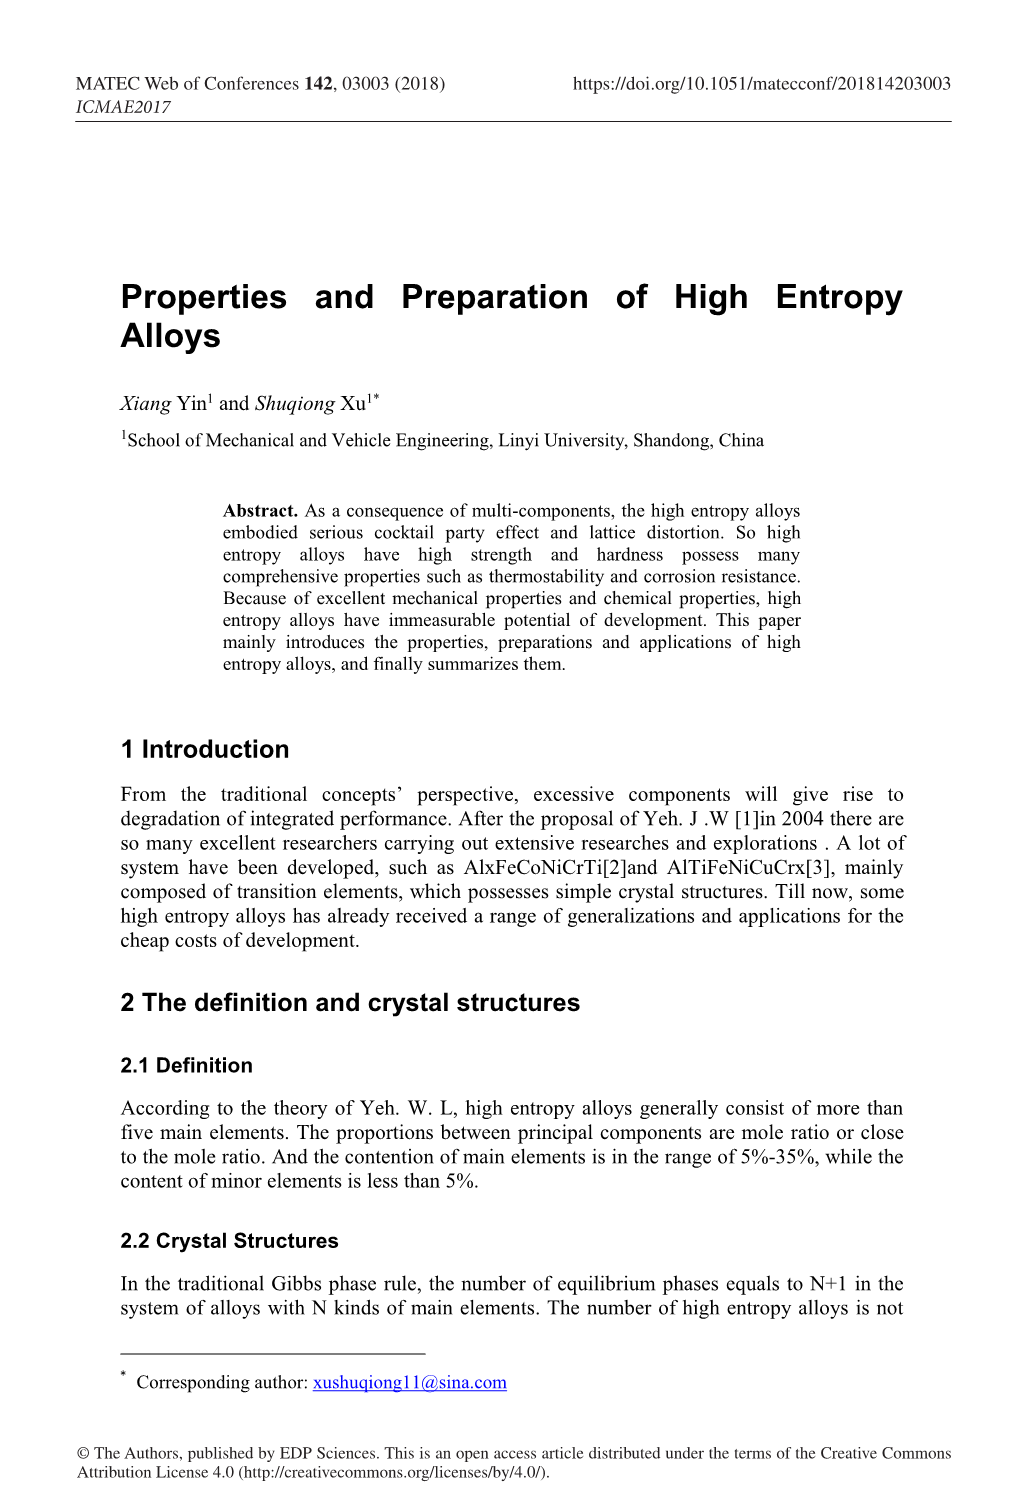 Properties and Preparation of High Entropy Alloys